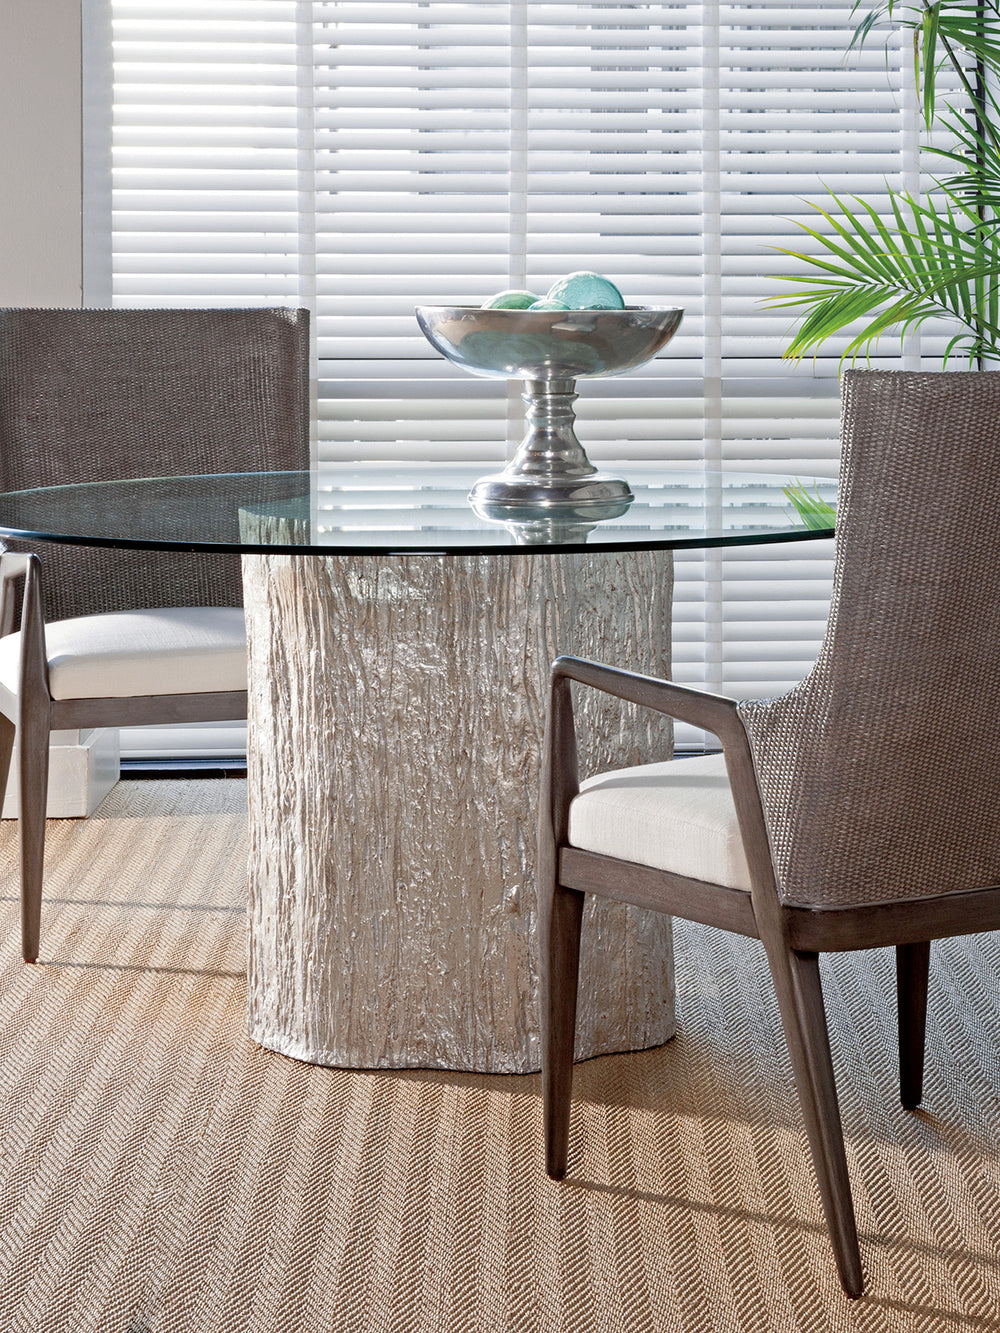 American Home Furniture | Artistica Home  - Signature Designs Trunk Segment Round Dining Table With Glass Top - Silver Leaf